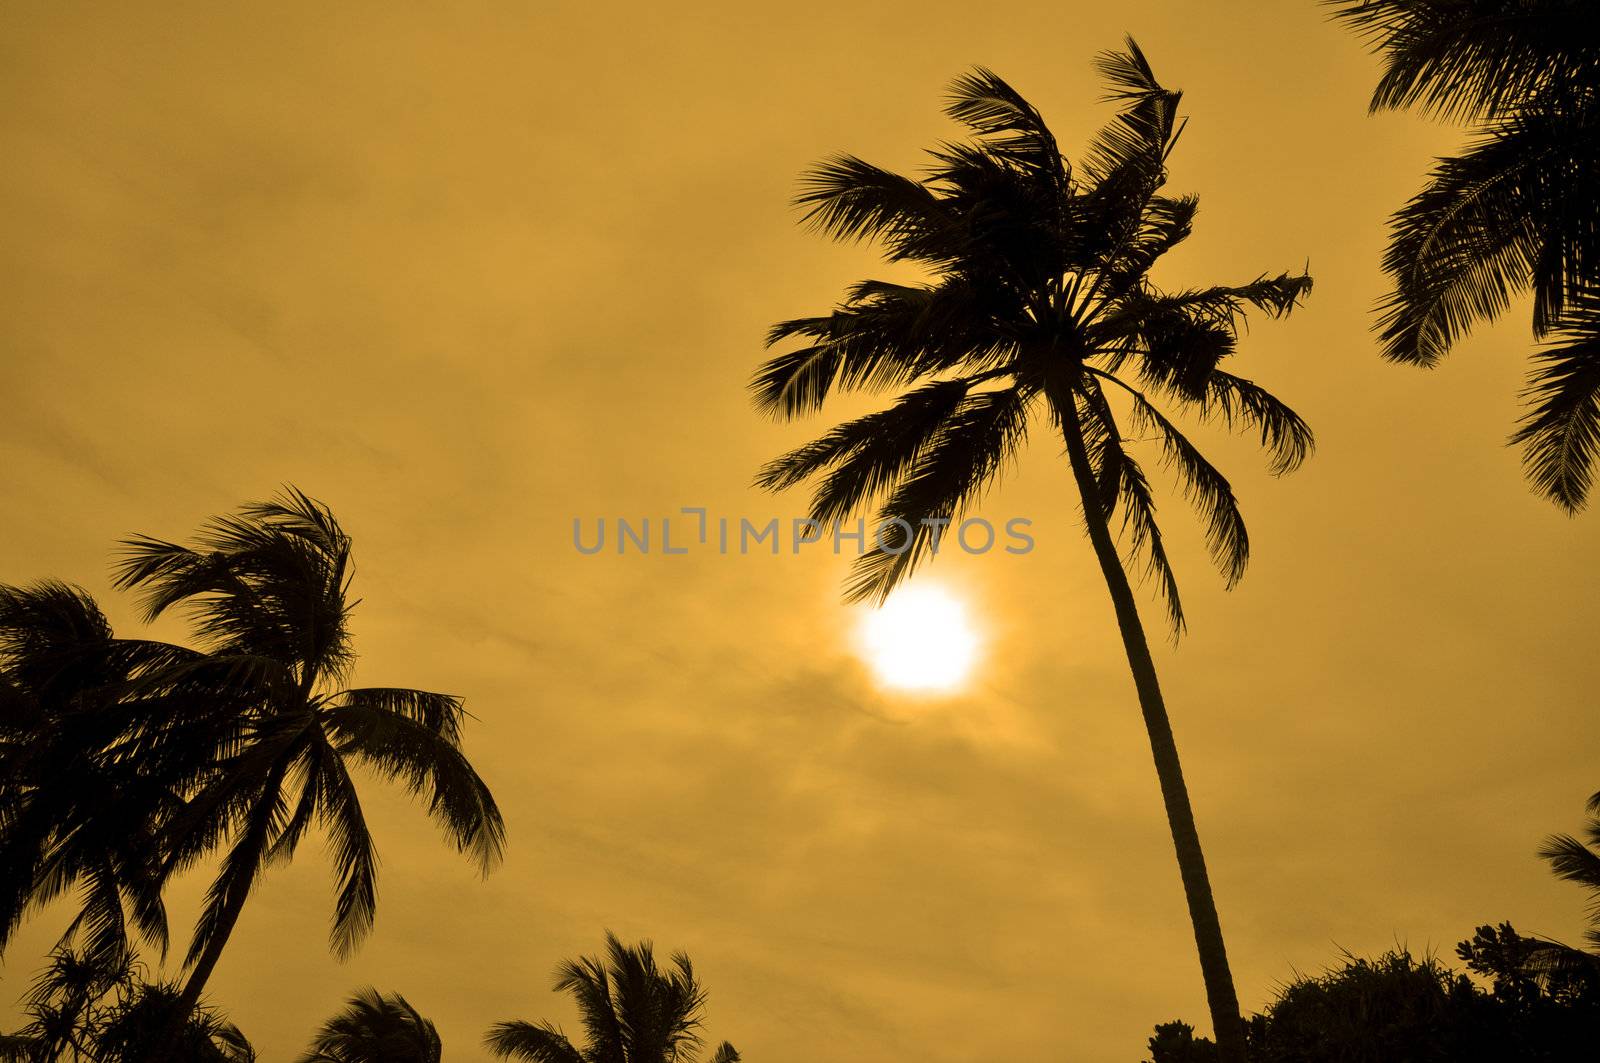 Silhouettes of Palm trees against the sun by kdreams02